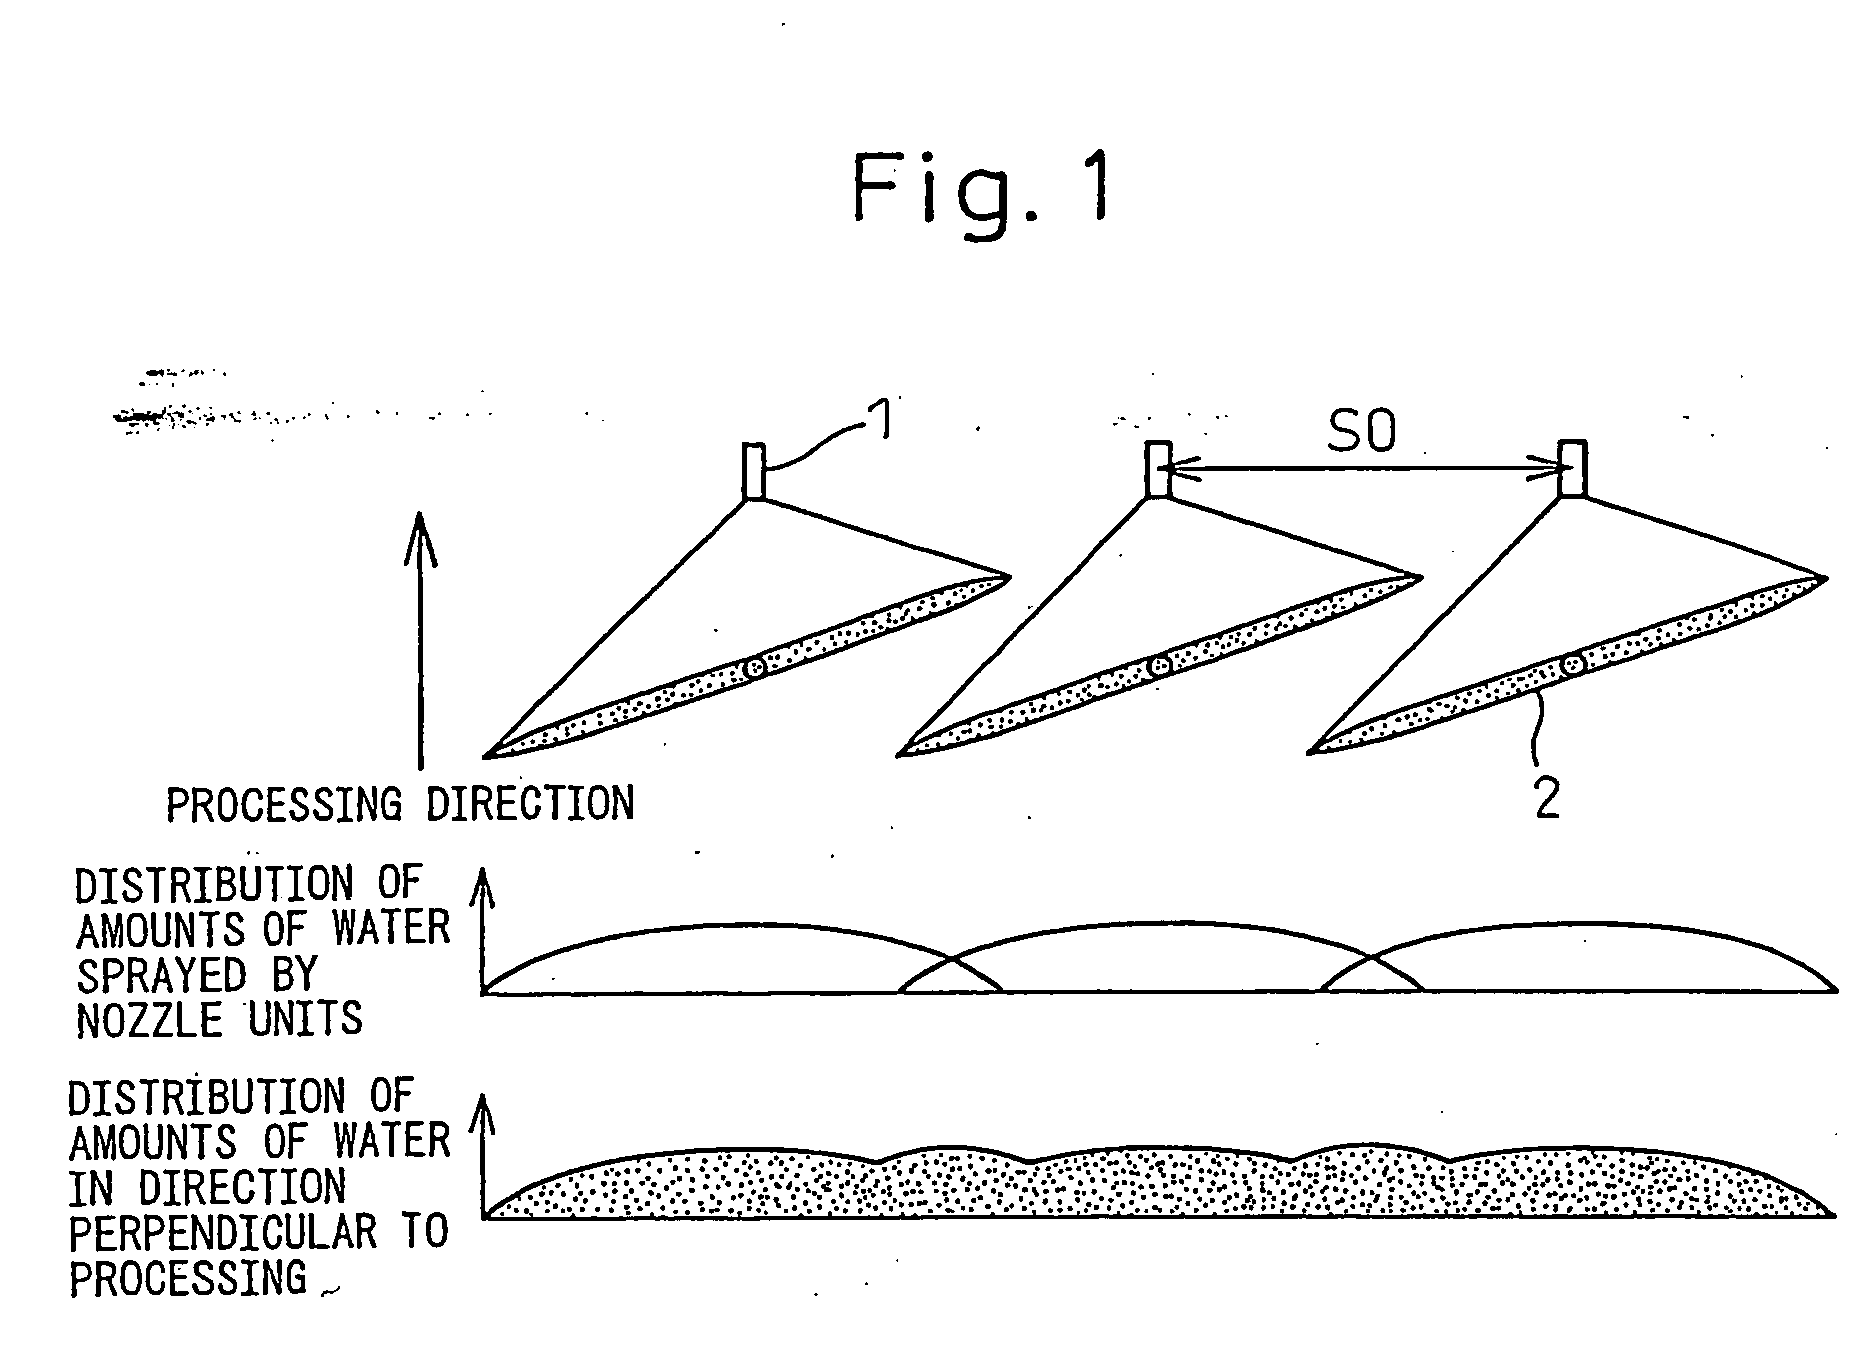 Method of Arranging and Setting Spray Cooling Nozzles and Hot Steel Plate Cooling Apparatus